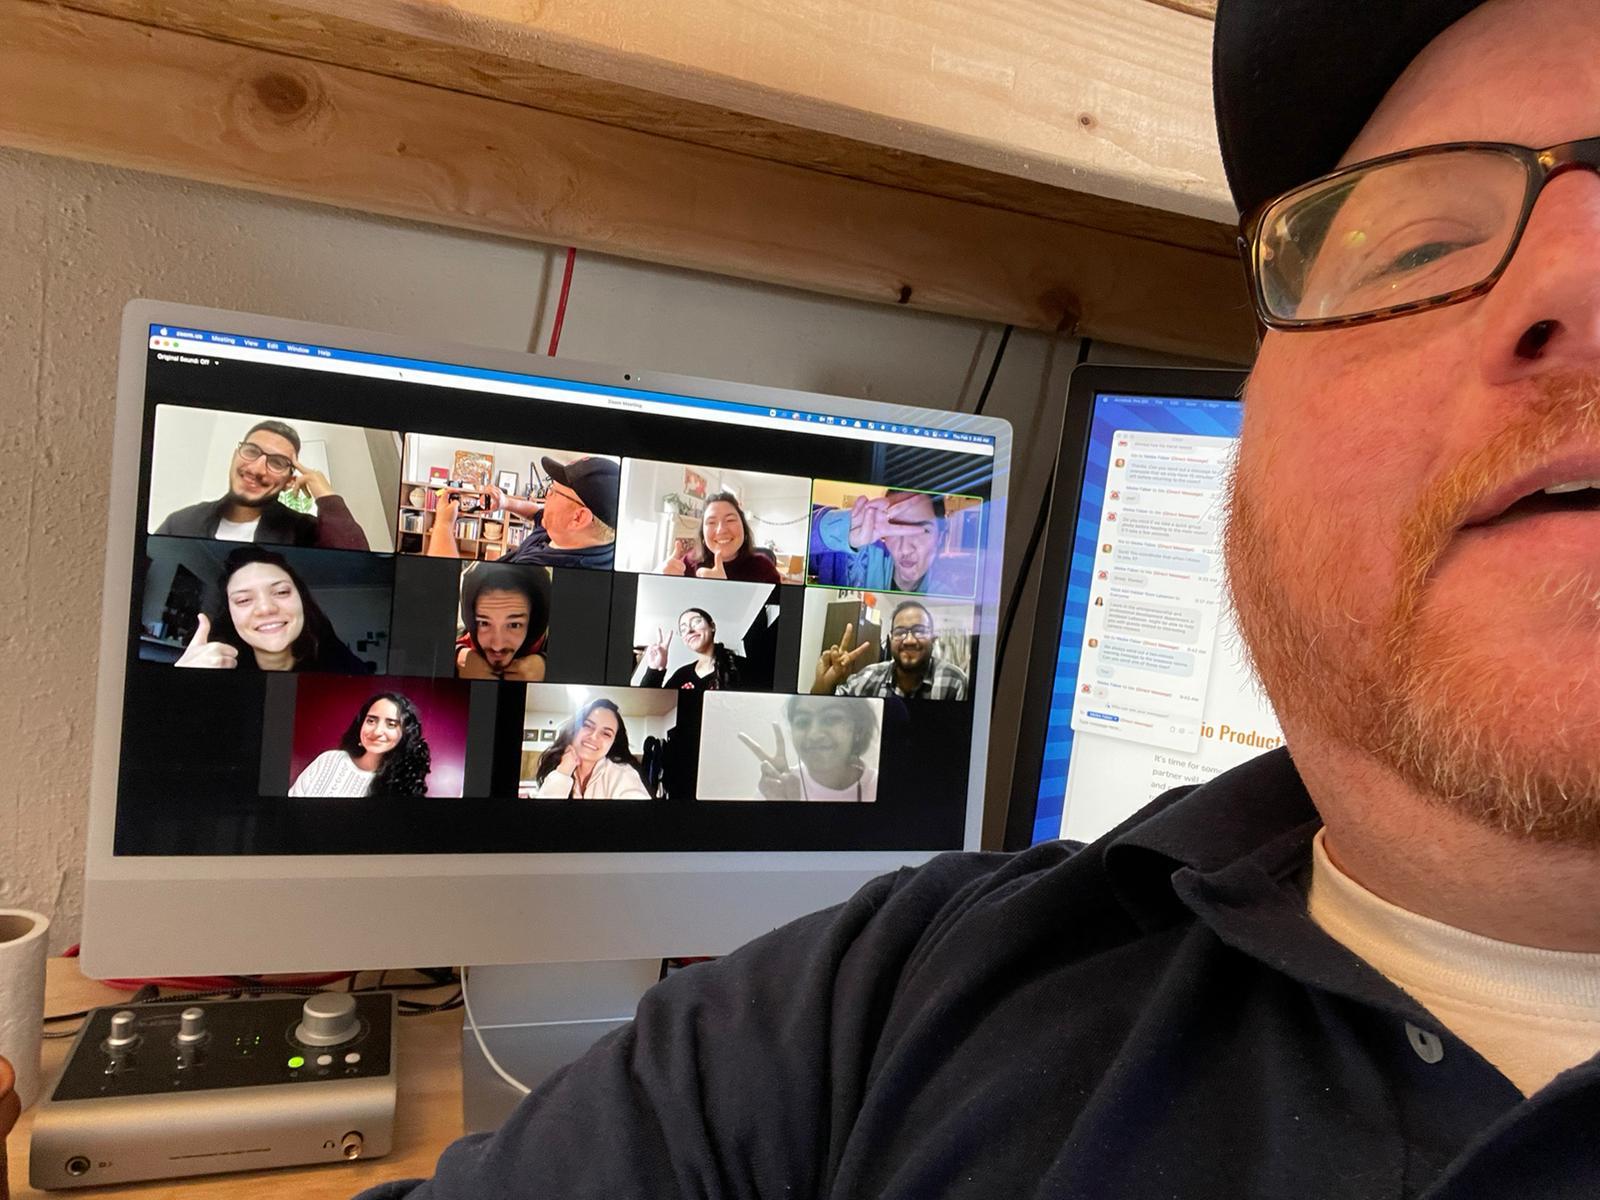 Podcast workshop trainer taking selfie with Zoom screen with podcast workshop participants